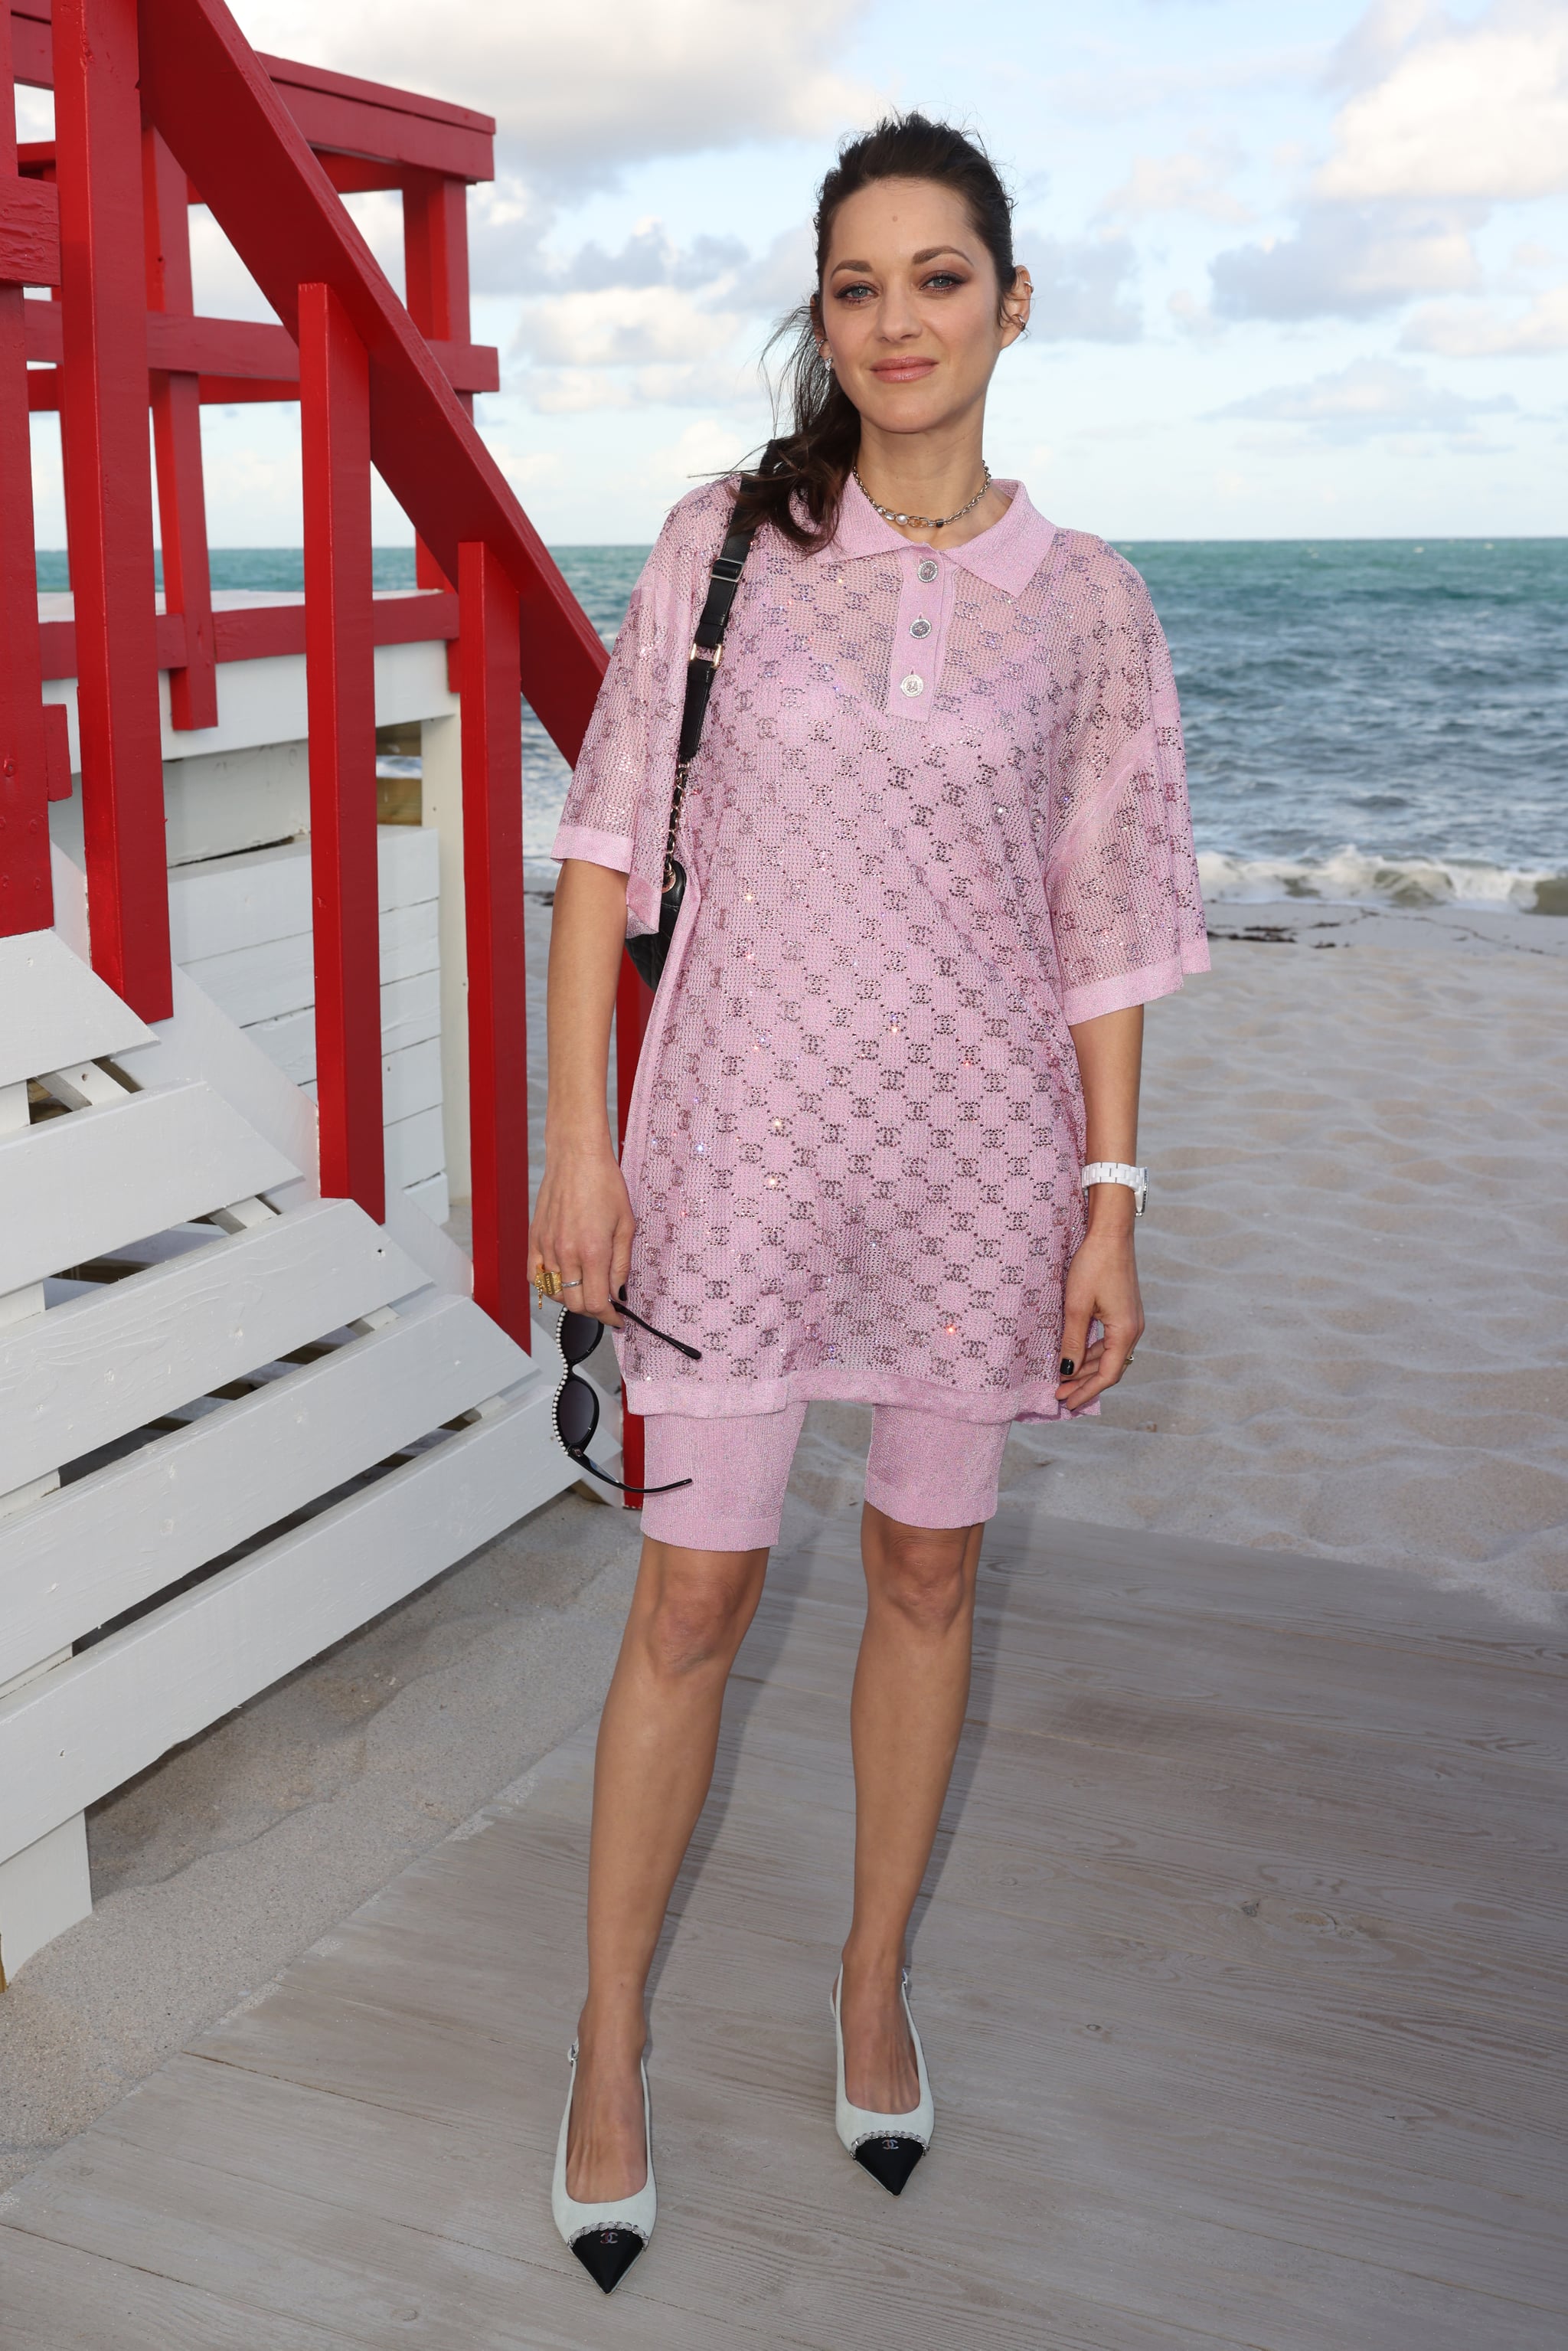 Marion Cotillard Wears Micro Shorts & Heels at Chanel's Couture